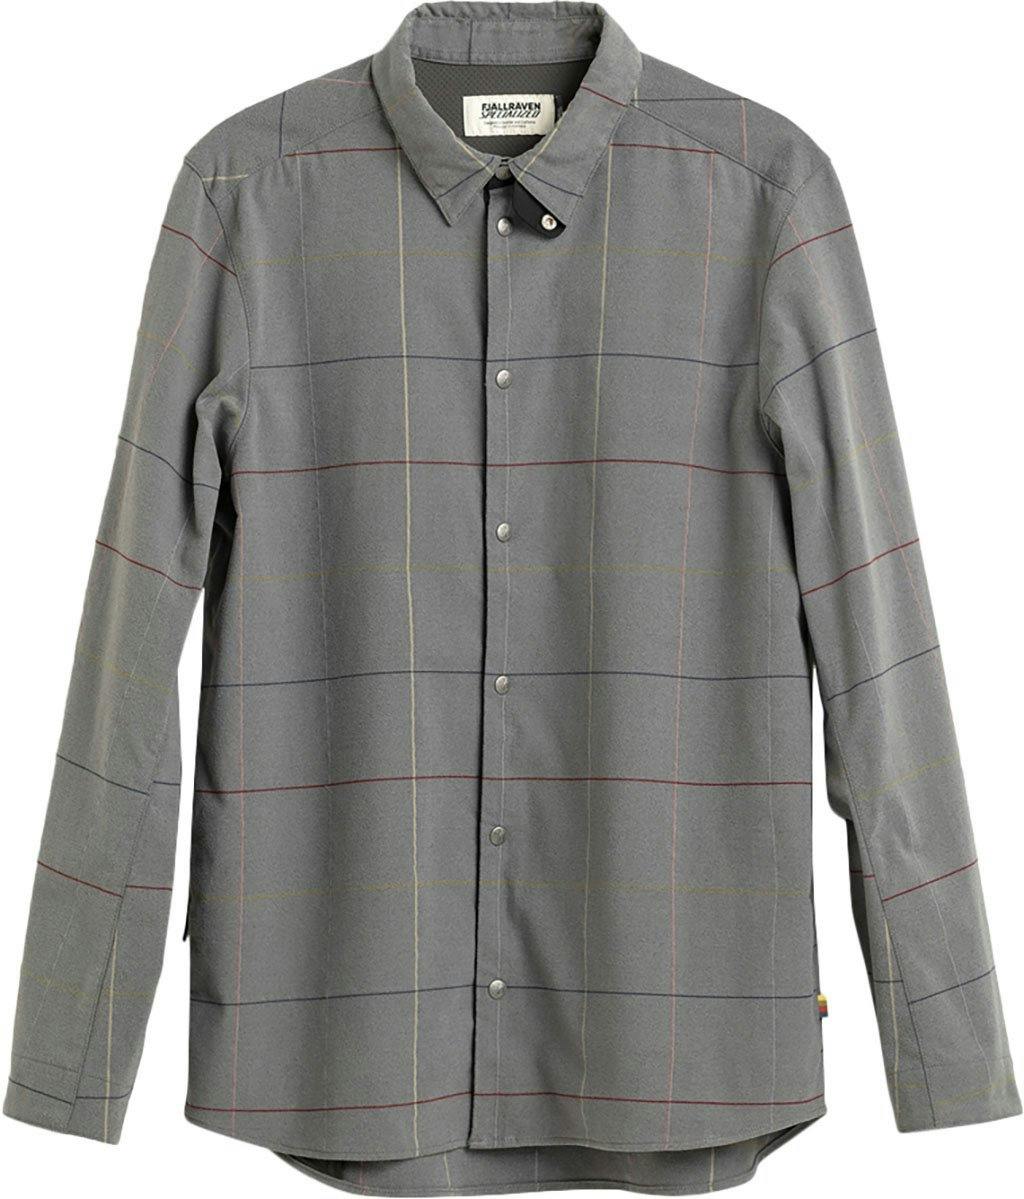 Product image for S/F Rider's Flannel Long Sleeve Shirt - Men's